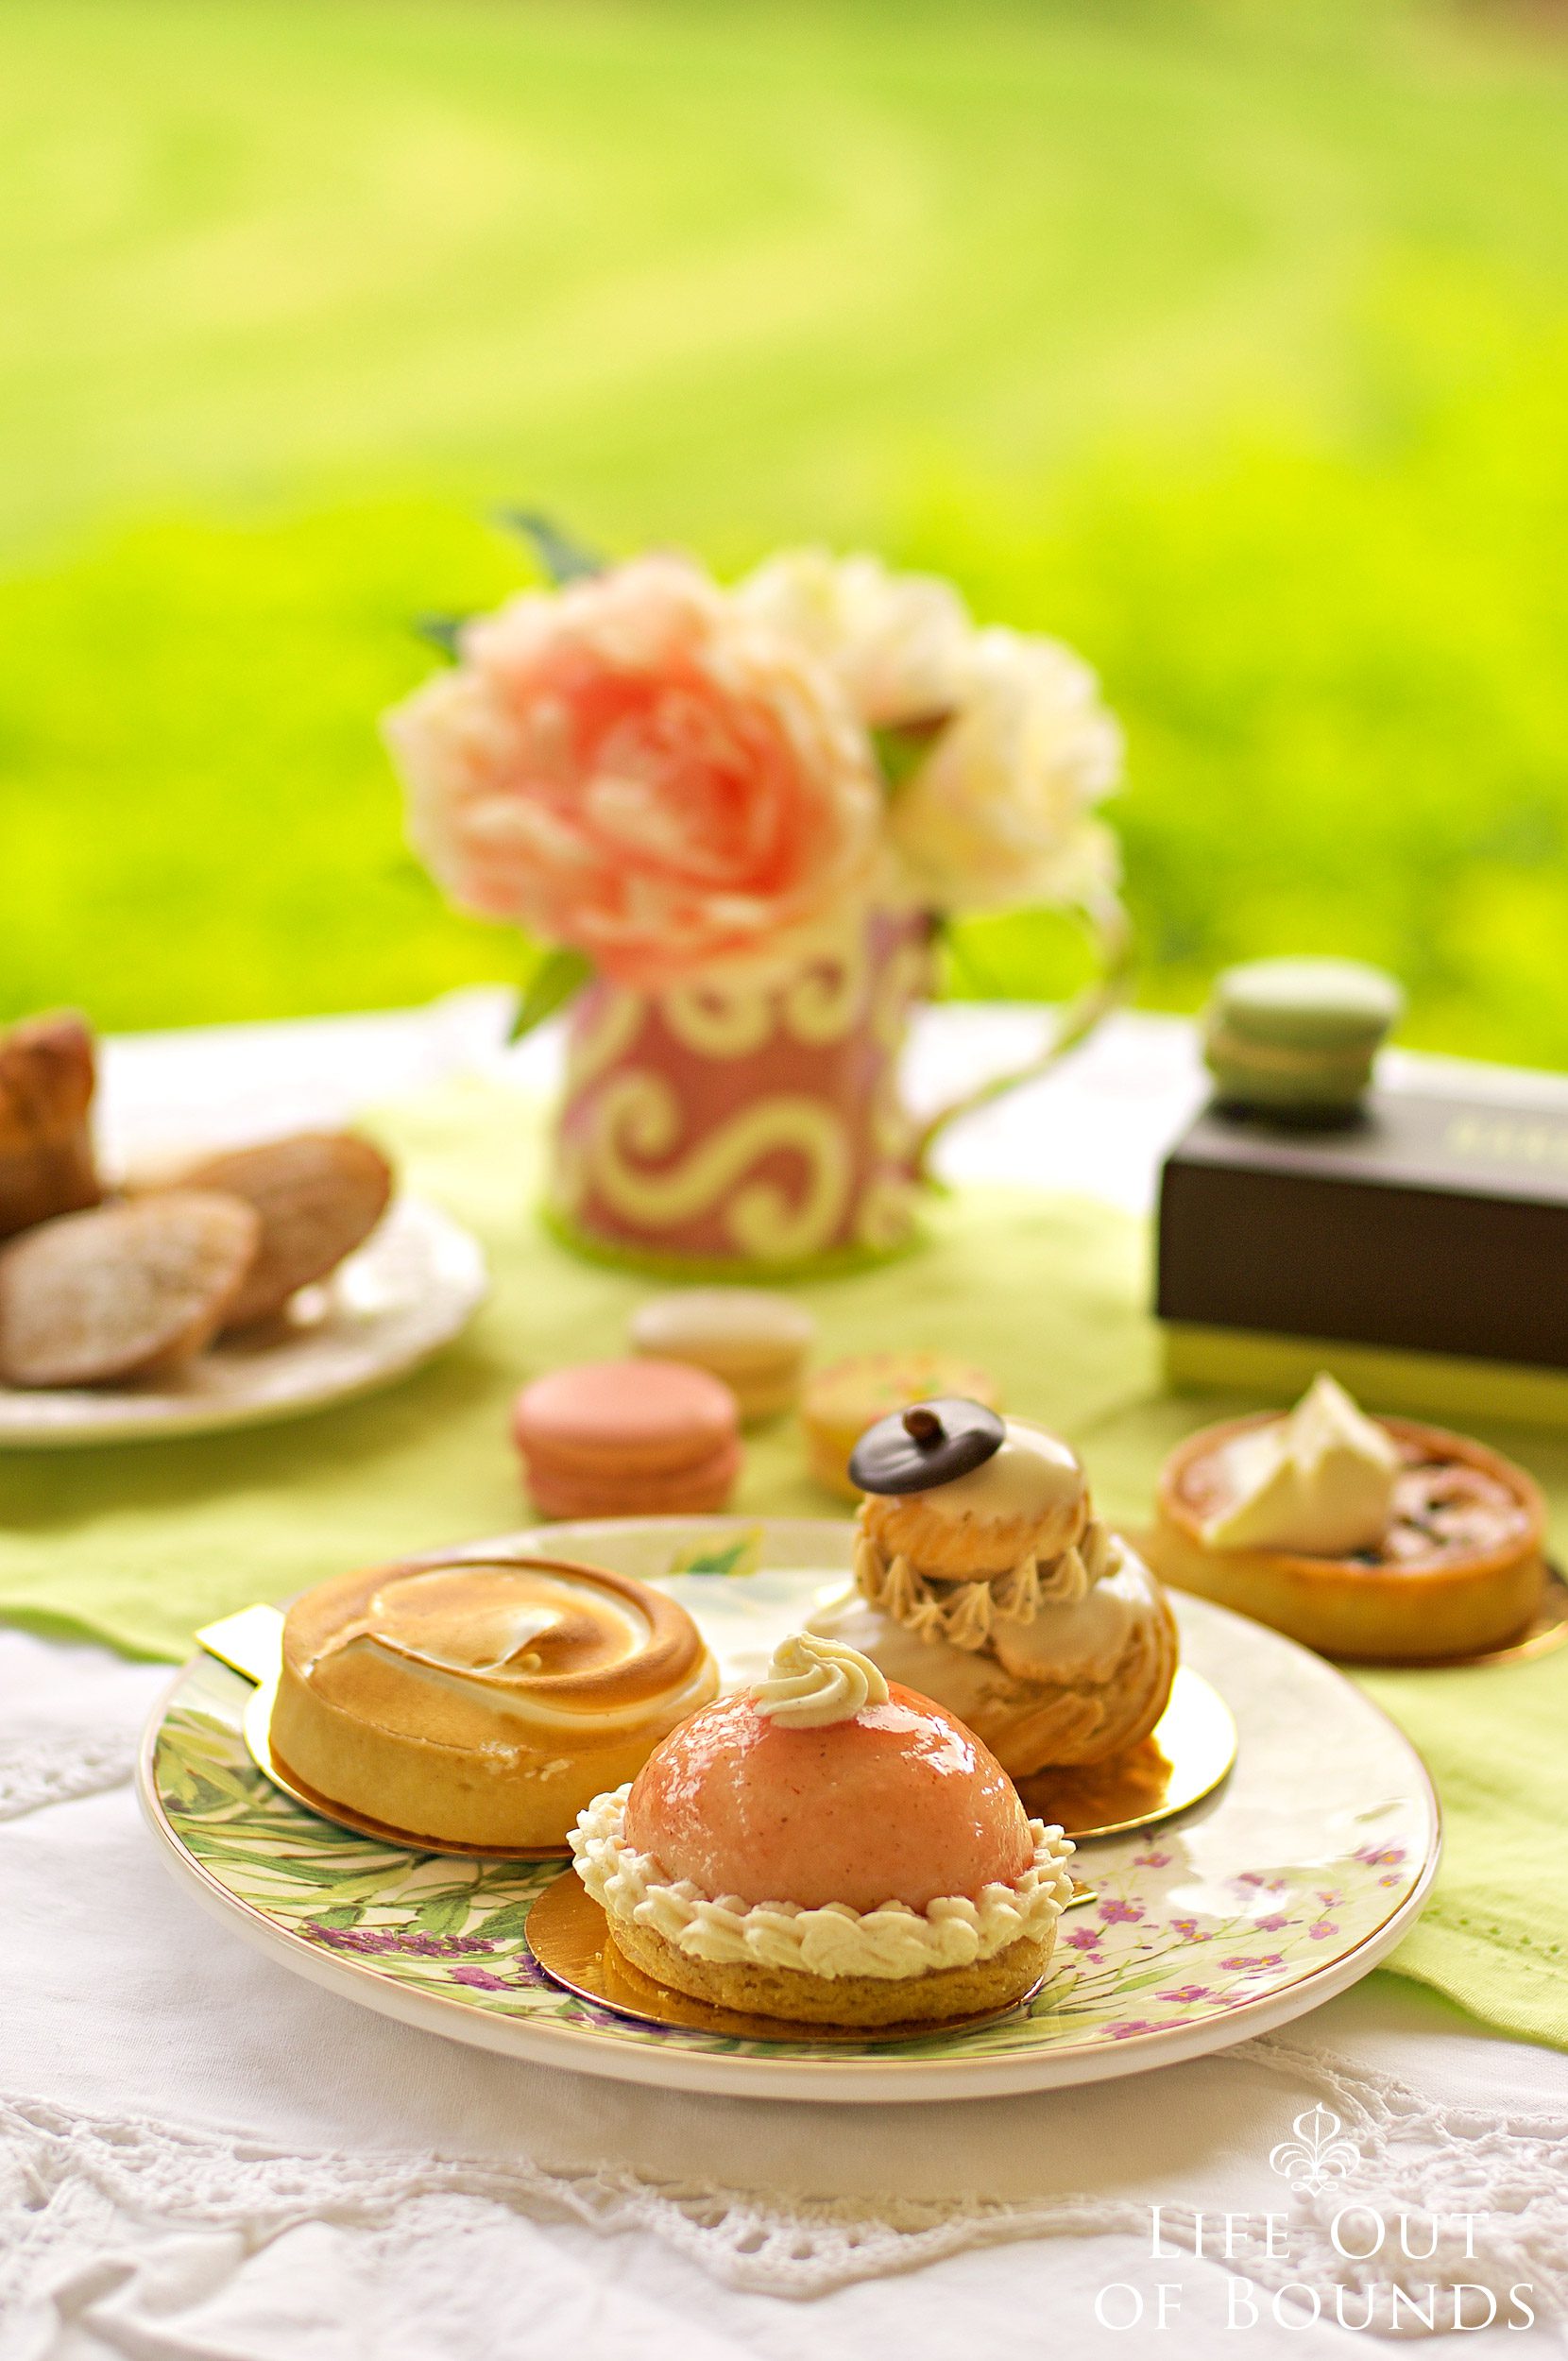 Exquisite-desserts-by-Bouchon-Bakery-in-Yountville-Napa-Valley-California